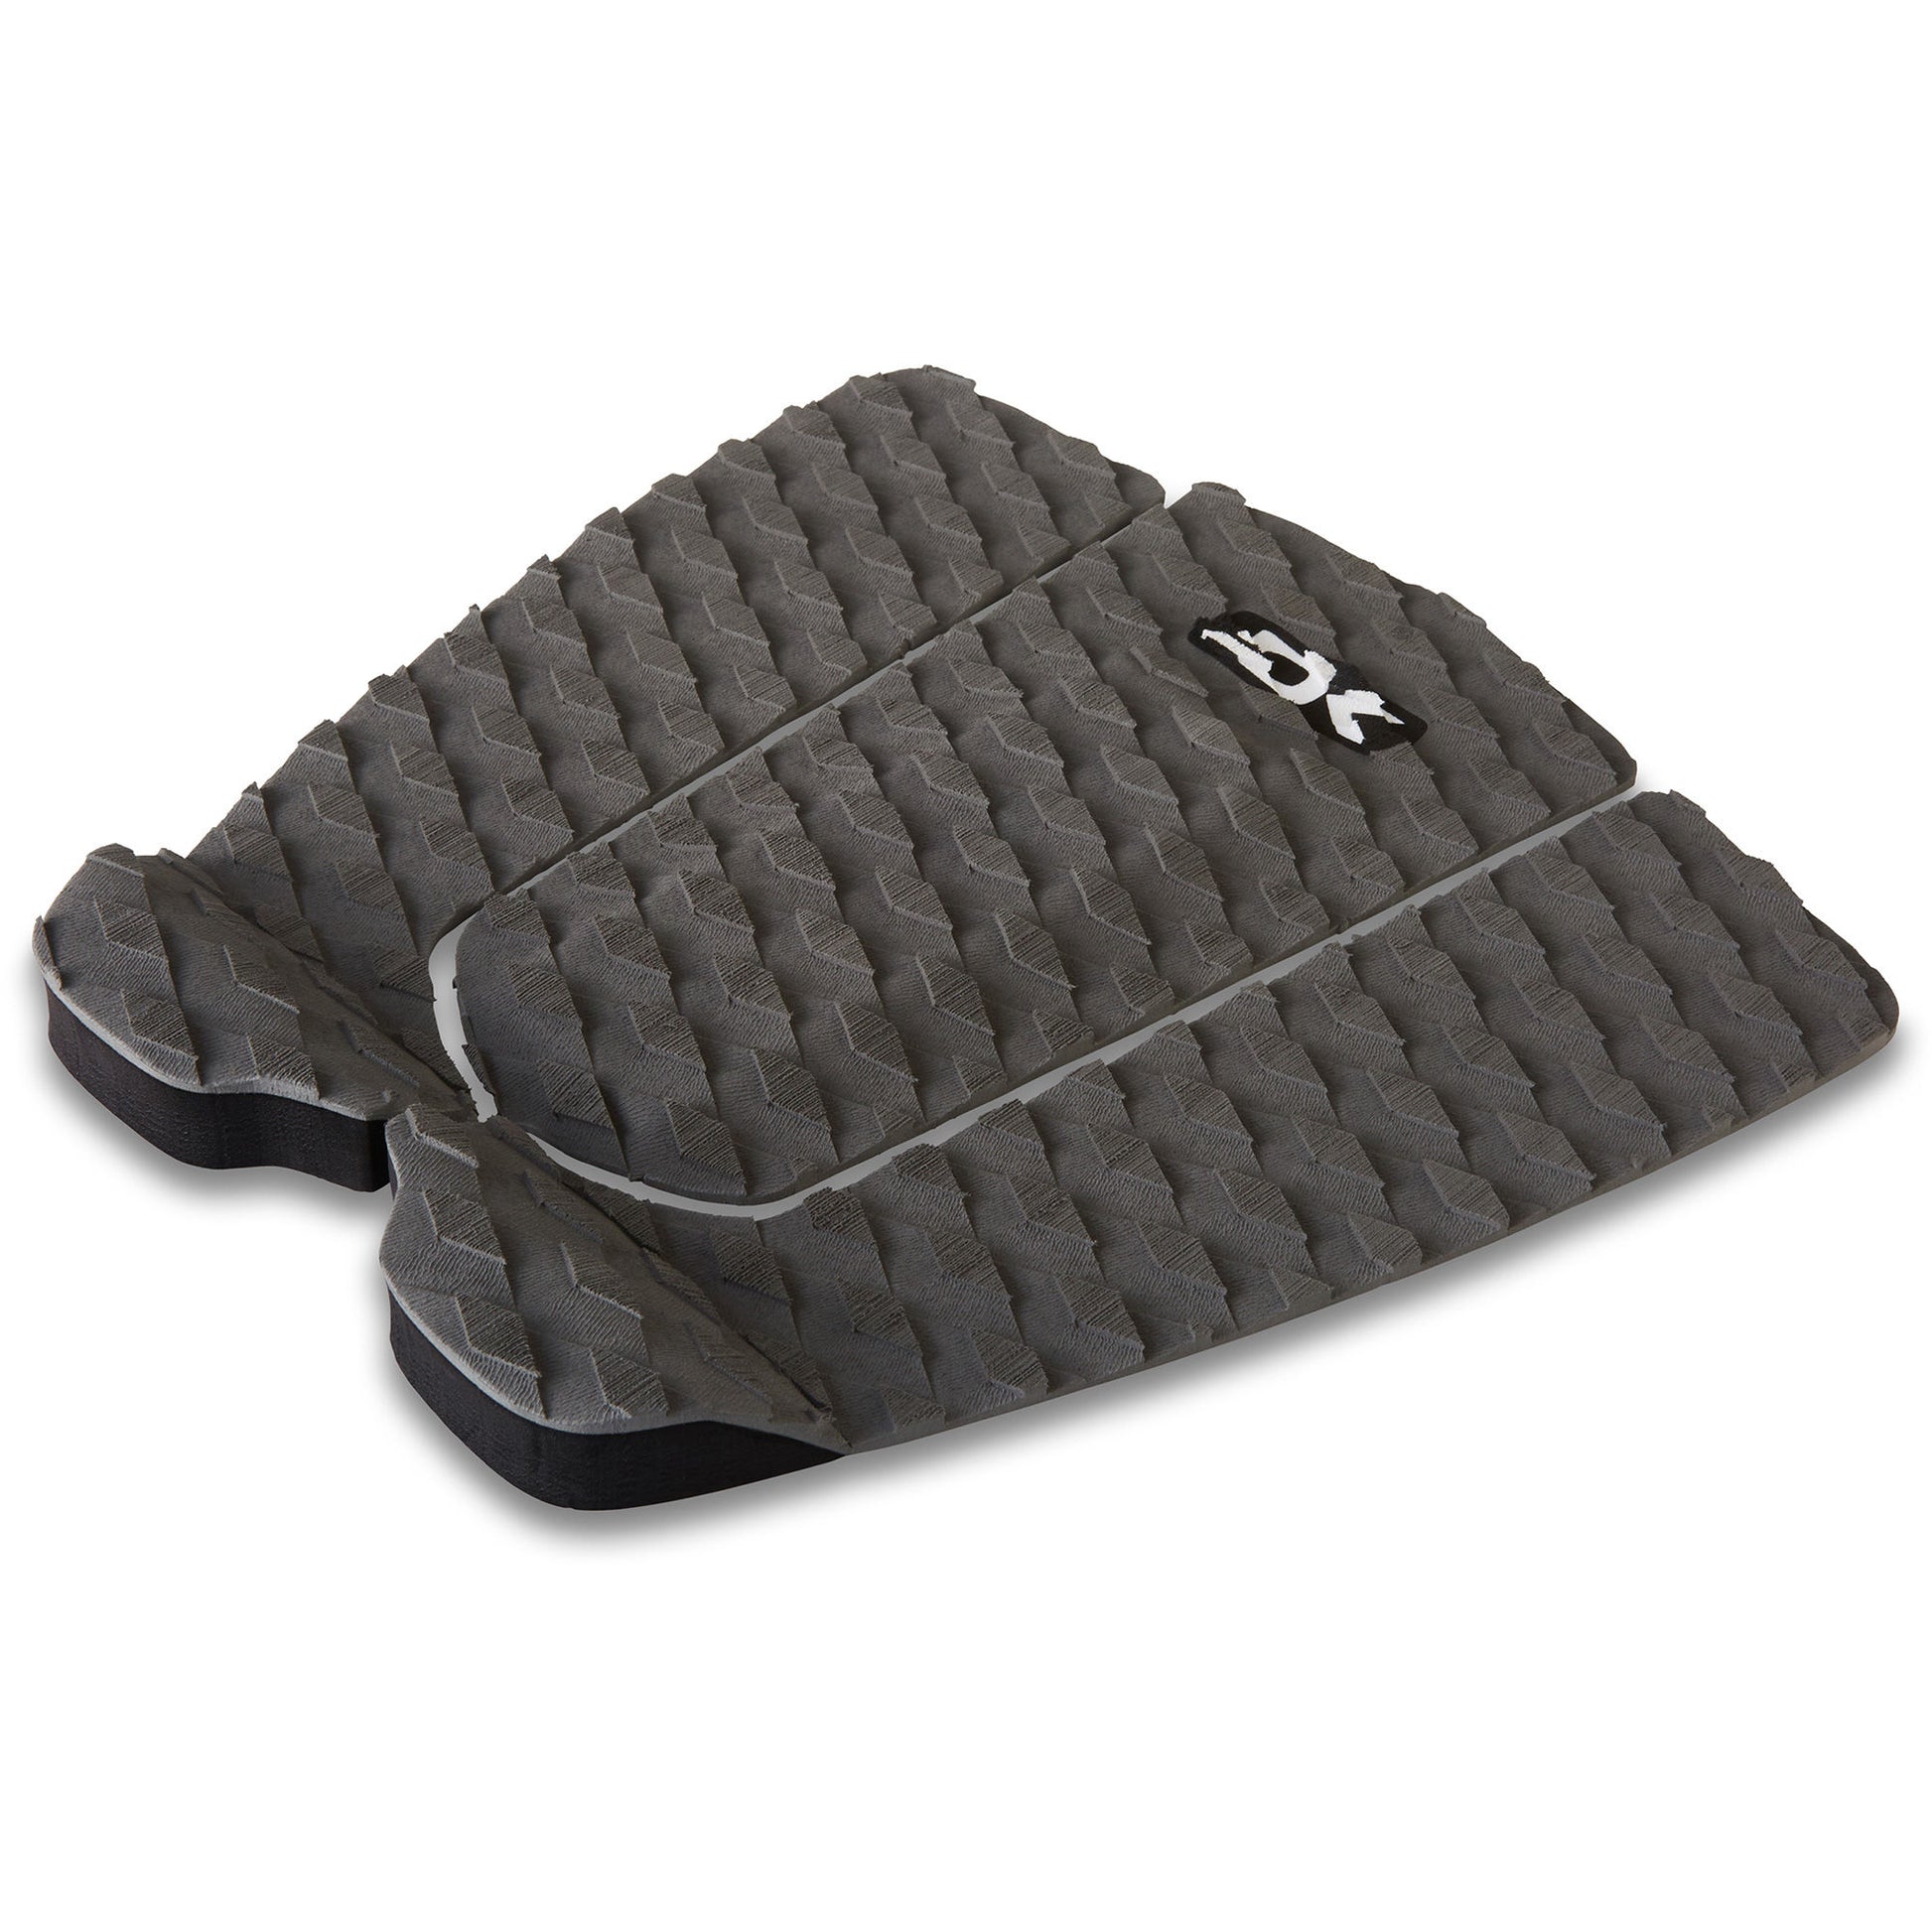 Andy Irons Pro Surf Traction Pad Shadow